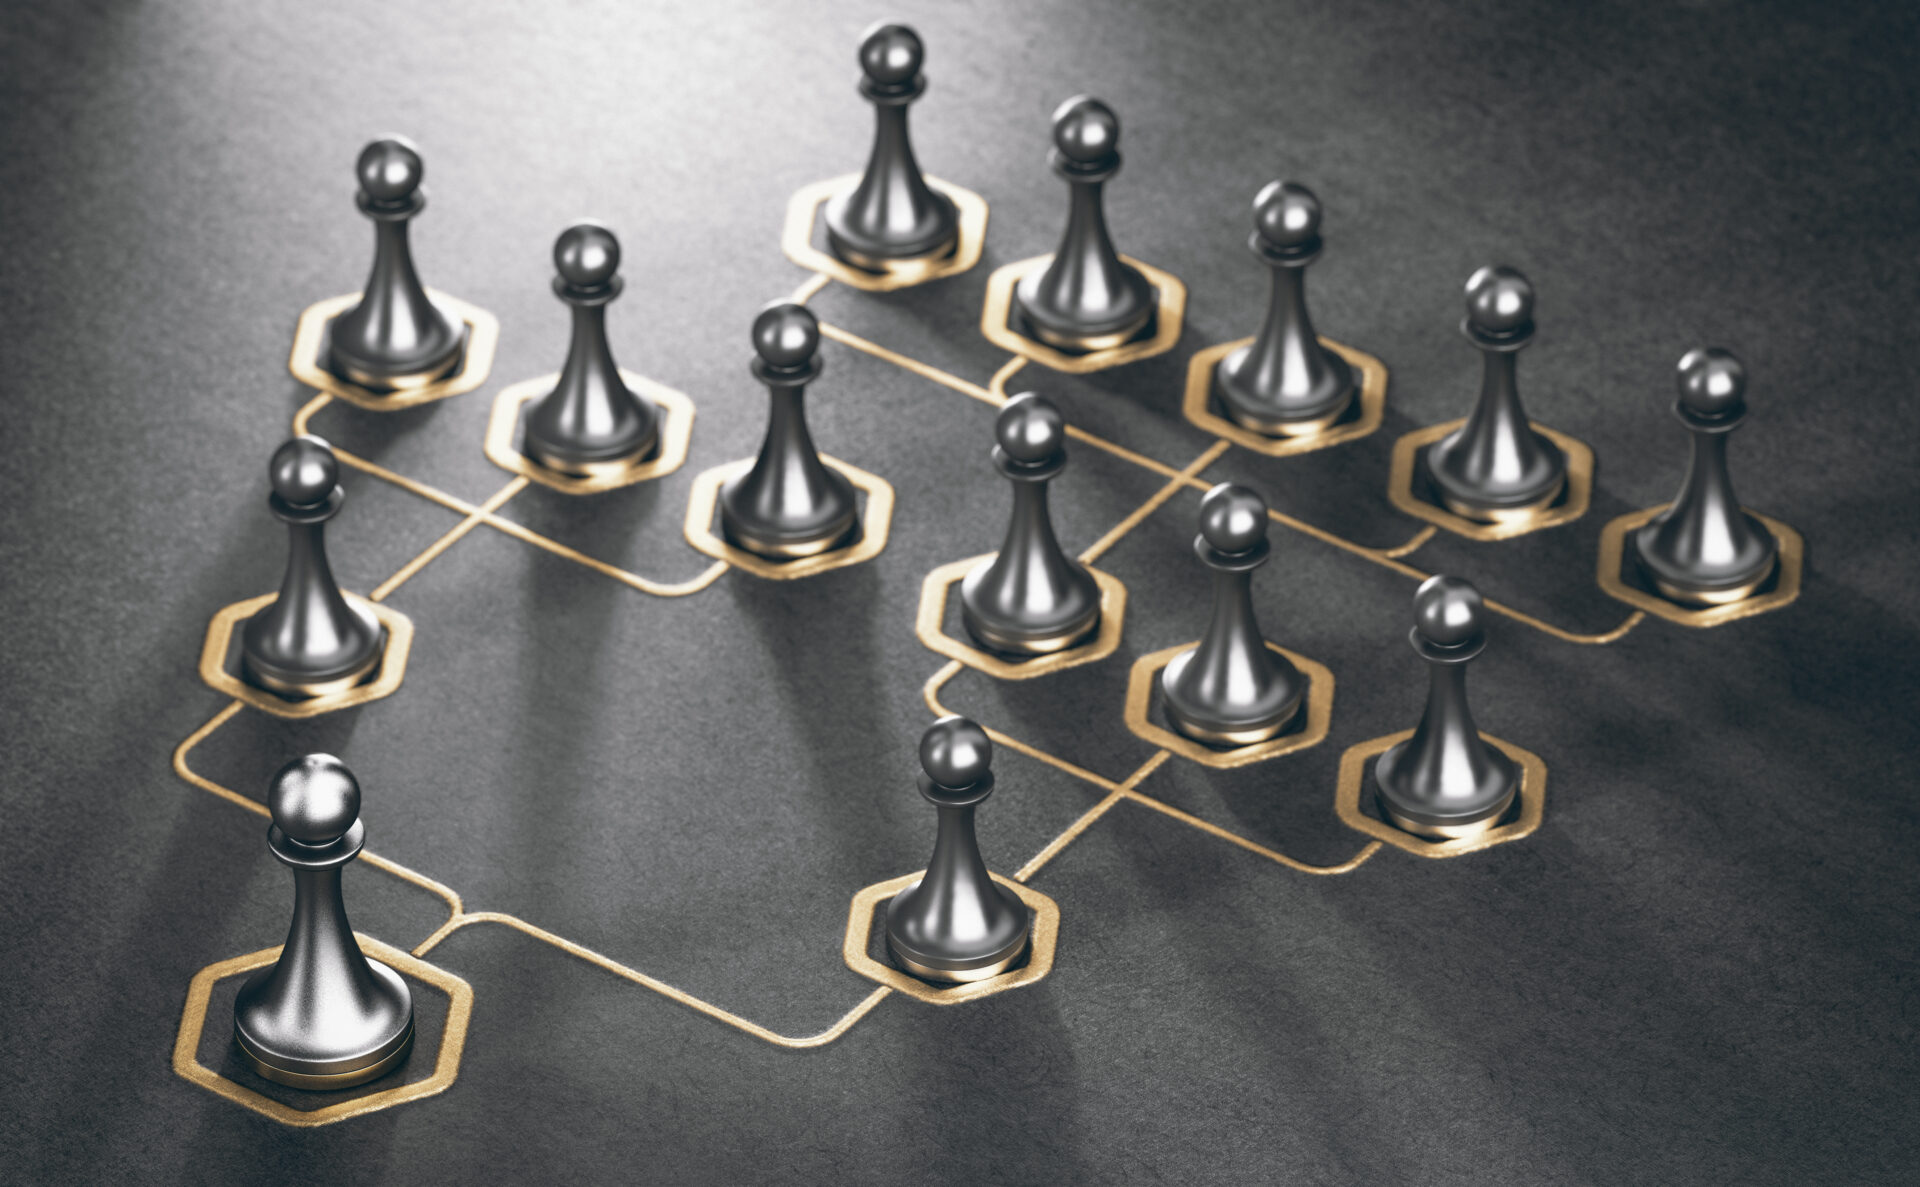 3D illustration of many pawns and golden organizational sheme over black background. Company hierarchy concept.